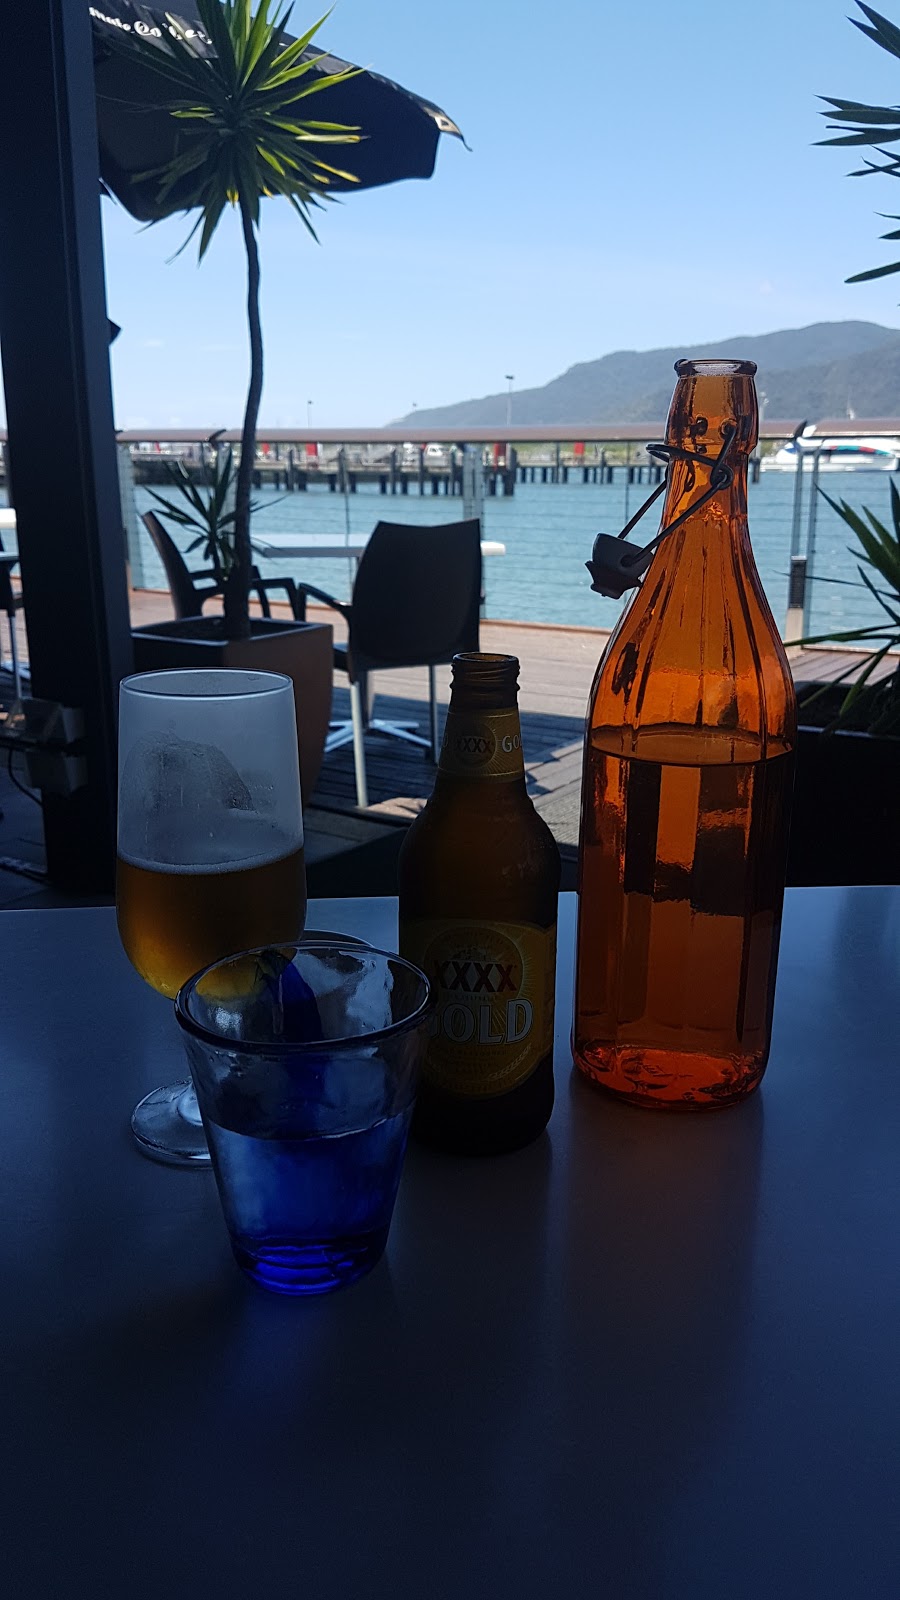 Dundees on the Waterfront | restaurant | 1 Marlin Parade, Cairns City QLD 4870, Australia | 0740510399 OR +61 7 4051 0399